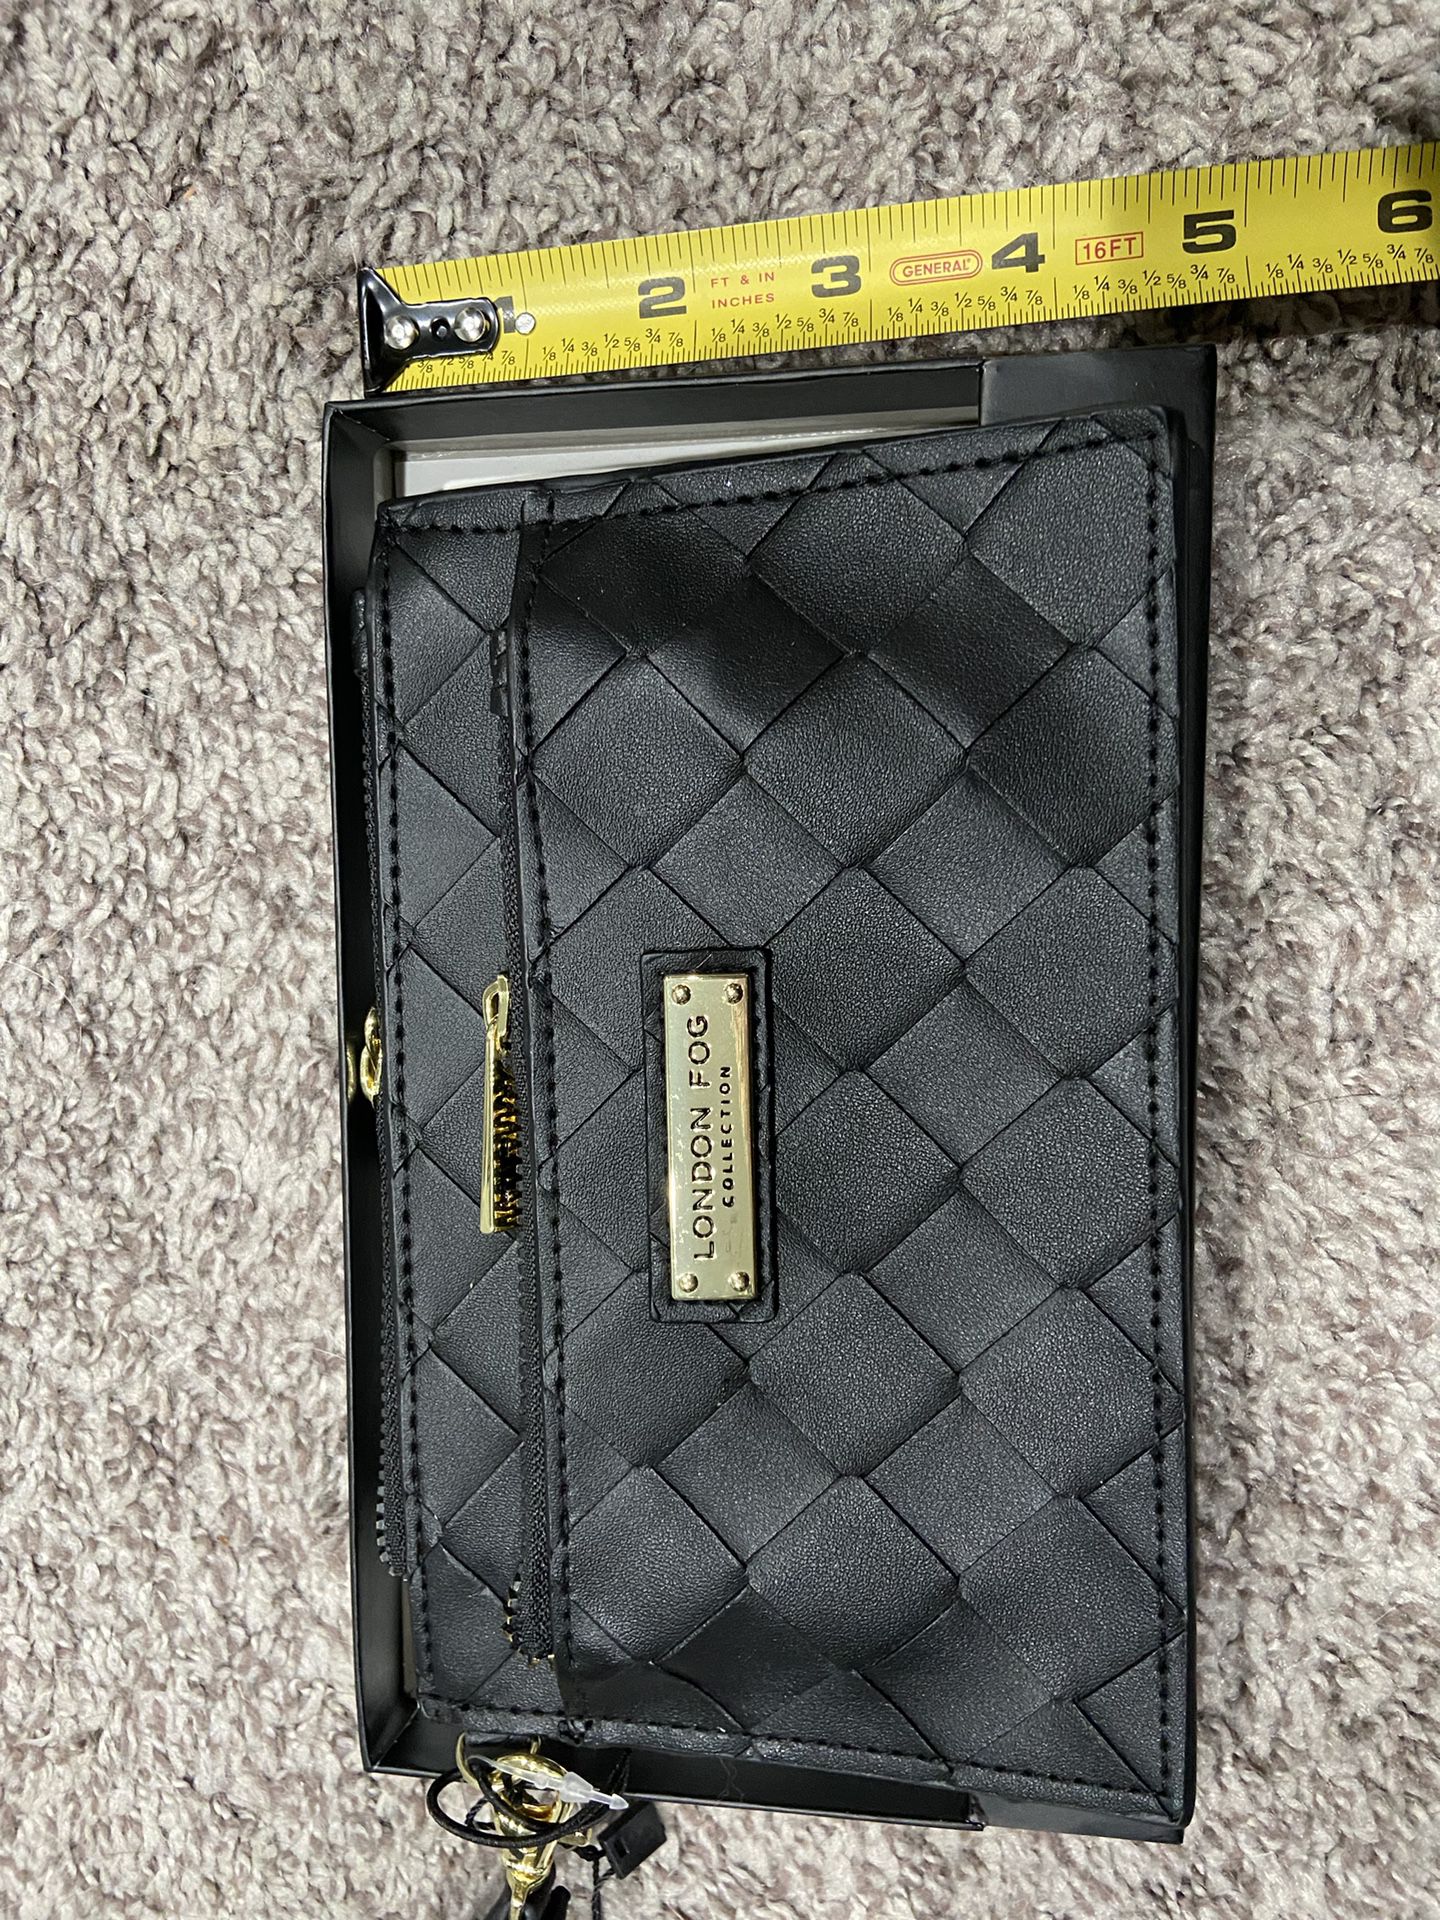 Black Chanel Purse for Sale in Portland, OR - OfferUp